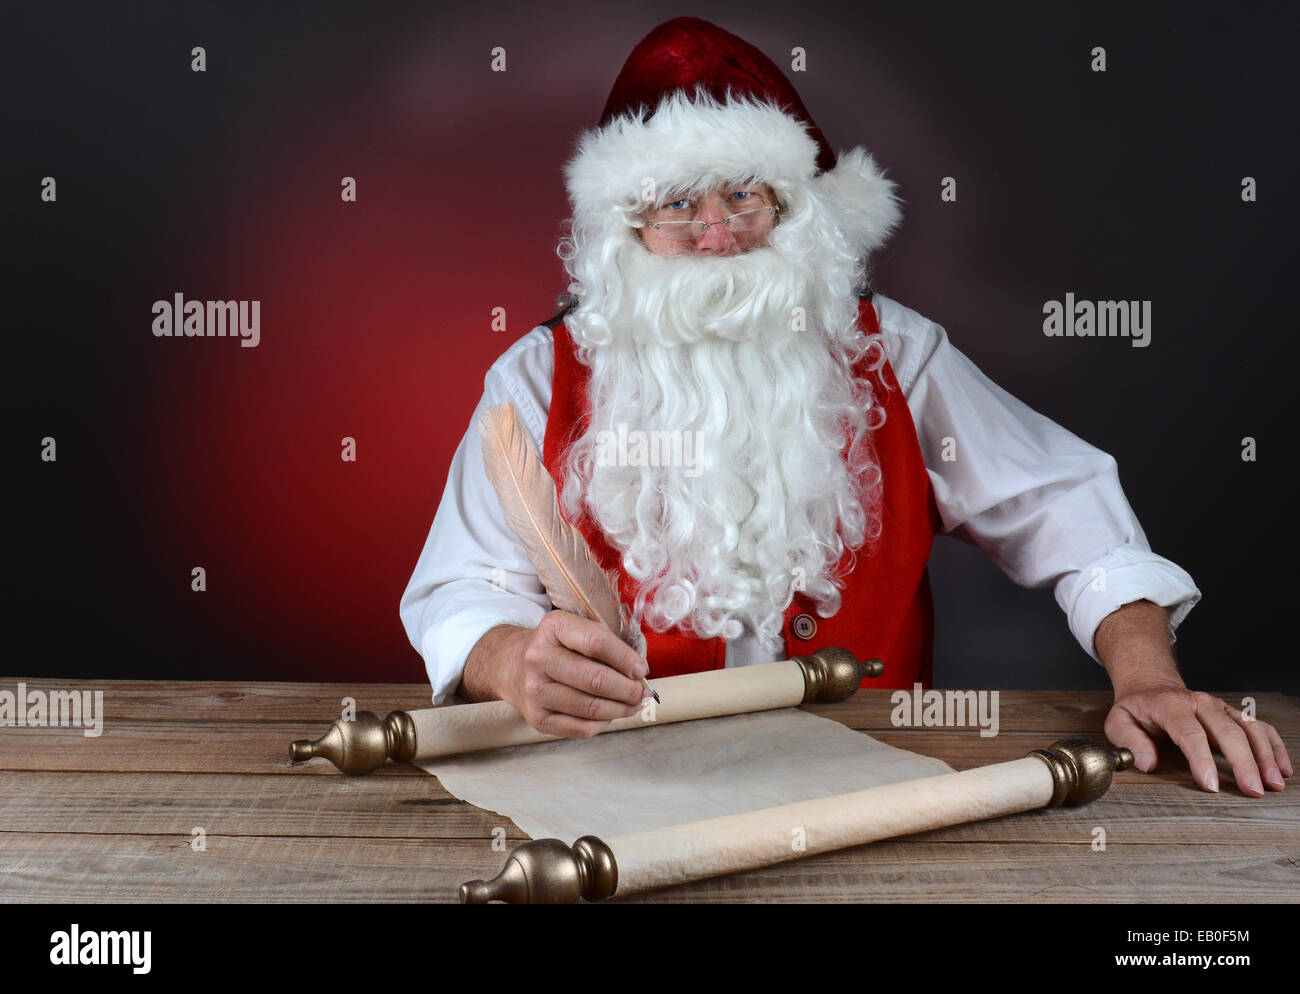 Santa Claus making his naughty and nice list on a scroll of parchment paper. Santa is seated at a rustic wood table. Horizontal Stock Photo